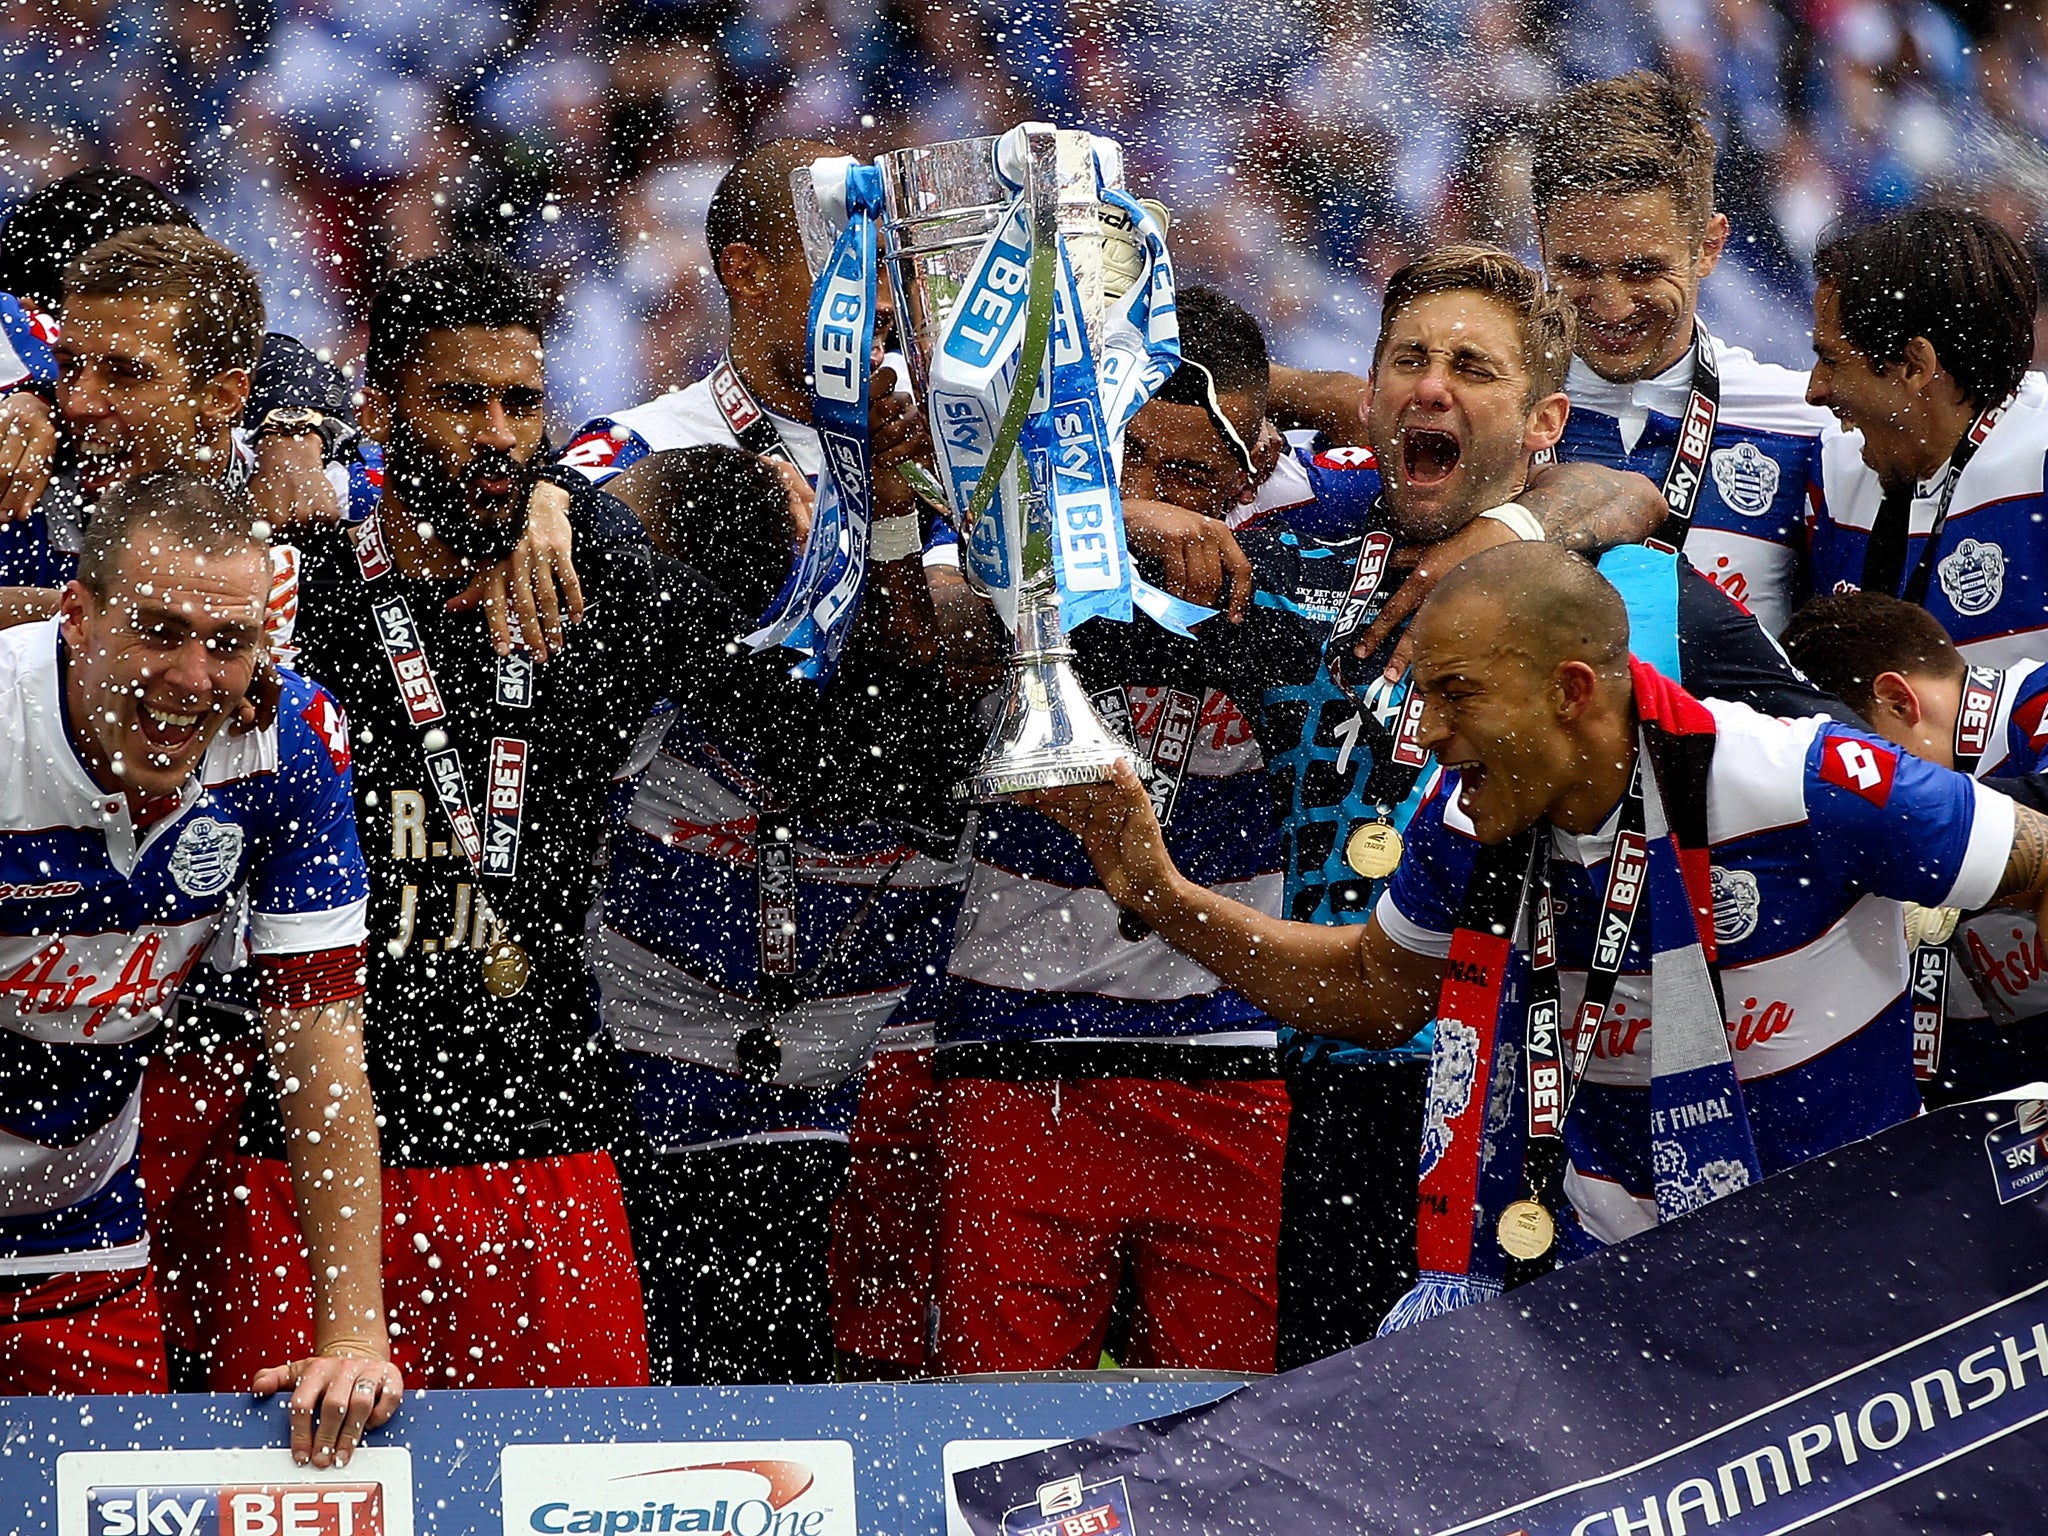 QPR celebrate winning the Championship play-off final